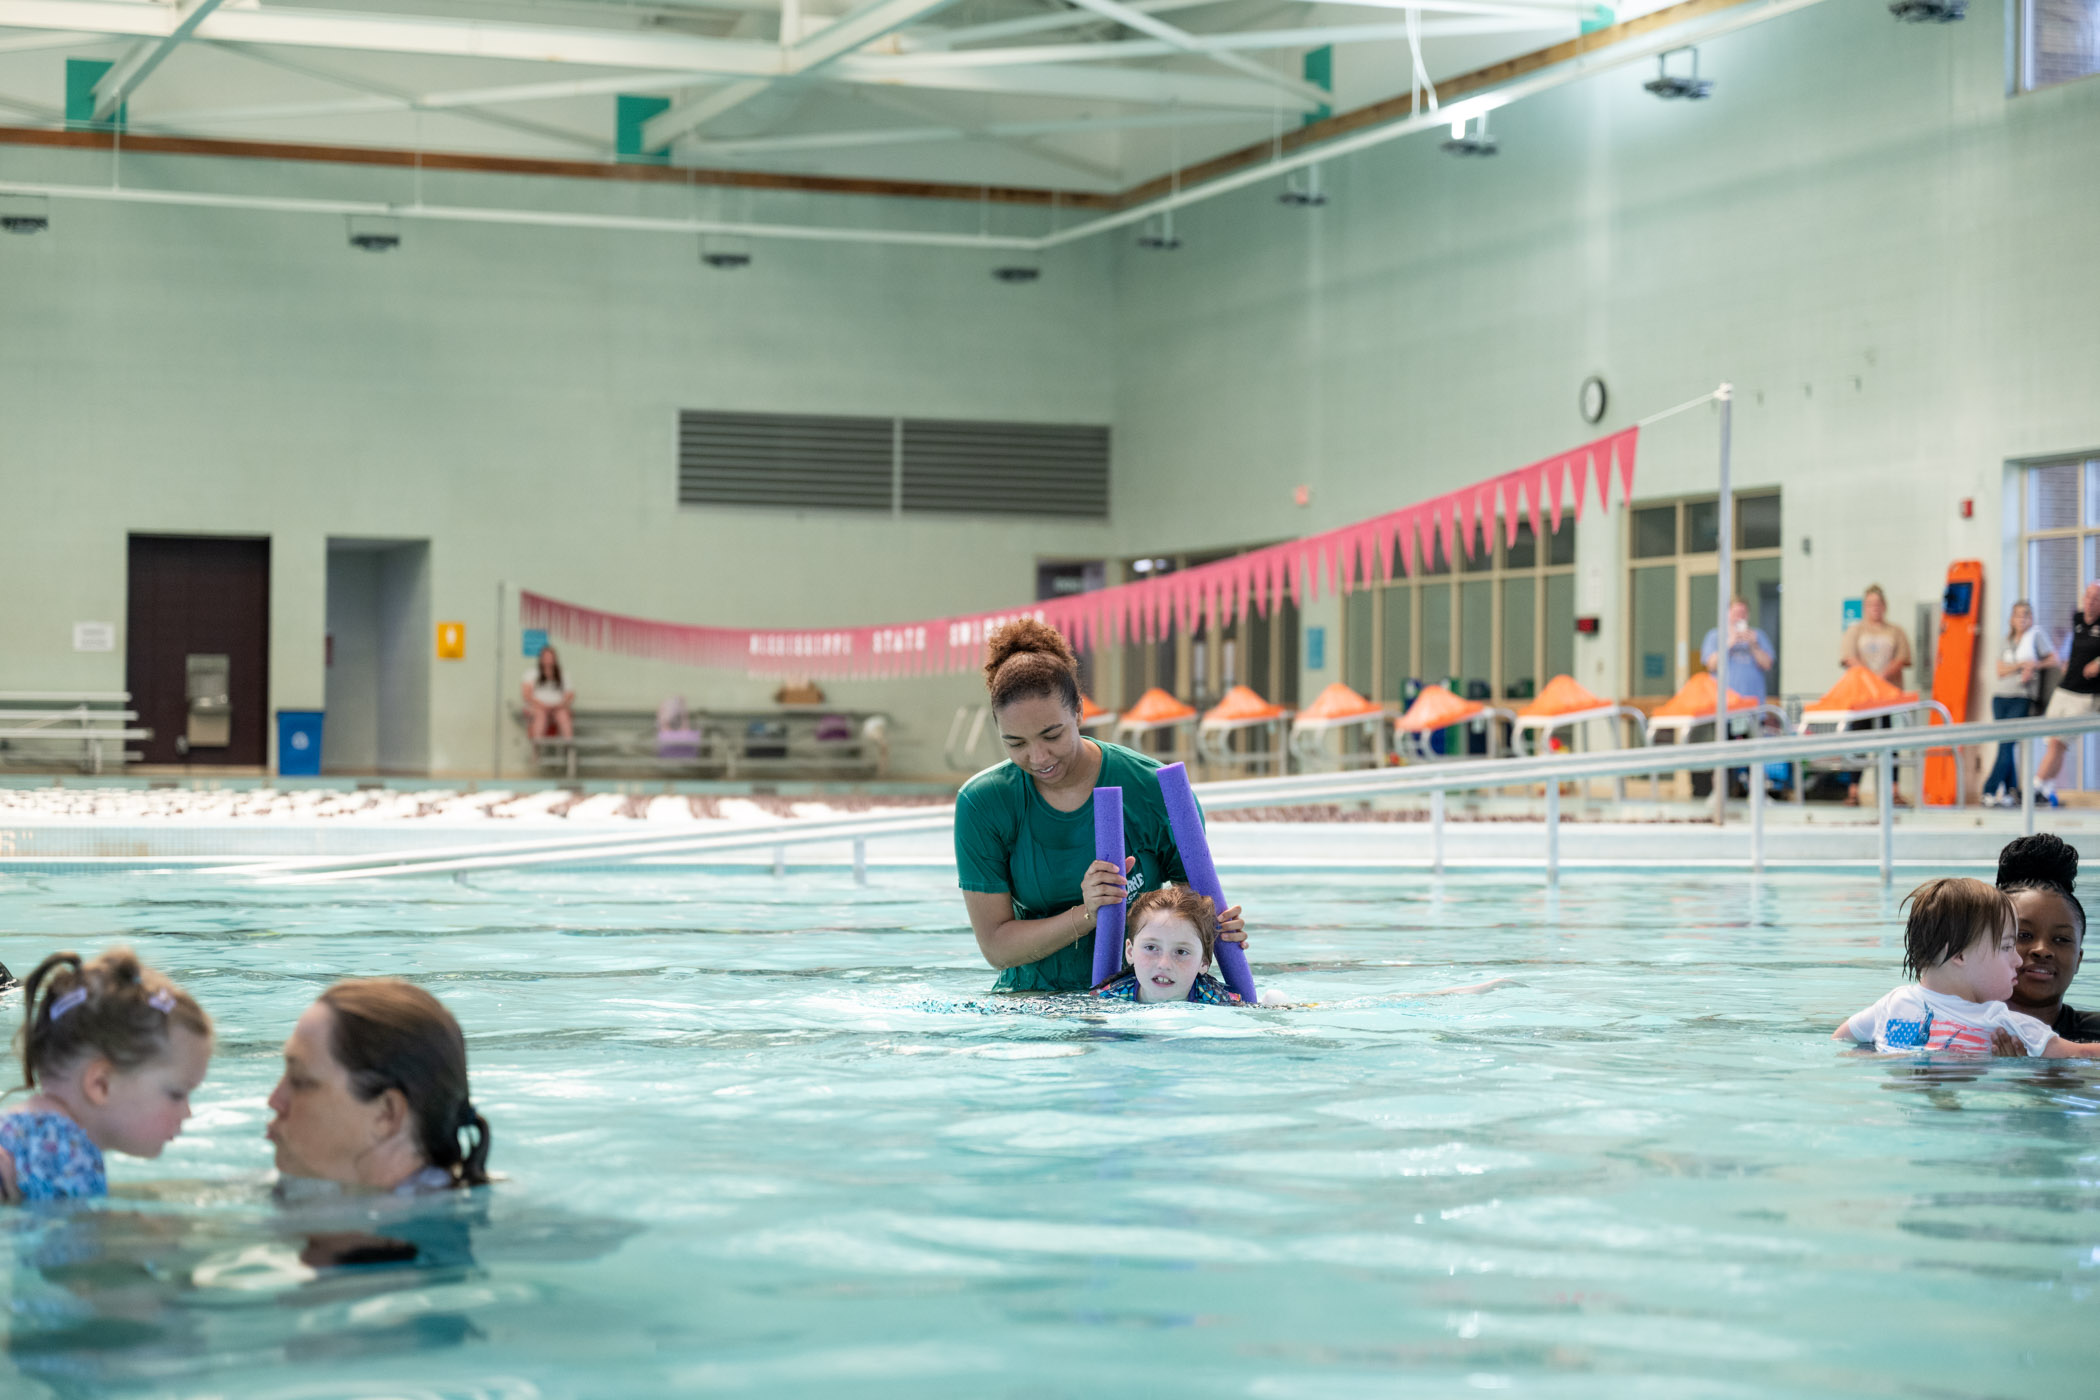 Hiba Bouchareb, a doctoral student studying mechanical engineering from Morocco, teaches Presley Porch valuable swimming skills recently during the MSU Adapted Swim Camp at the Sanderson Center. Certified camp staff and student volunteers in the Department of Kinesiology help participants work toward their individual aquatic goals while emphasizing water safety during the five-day event.